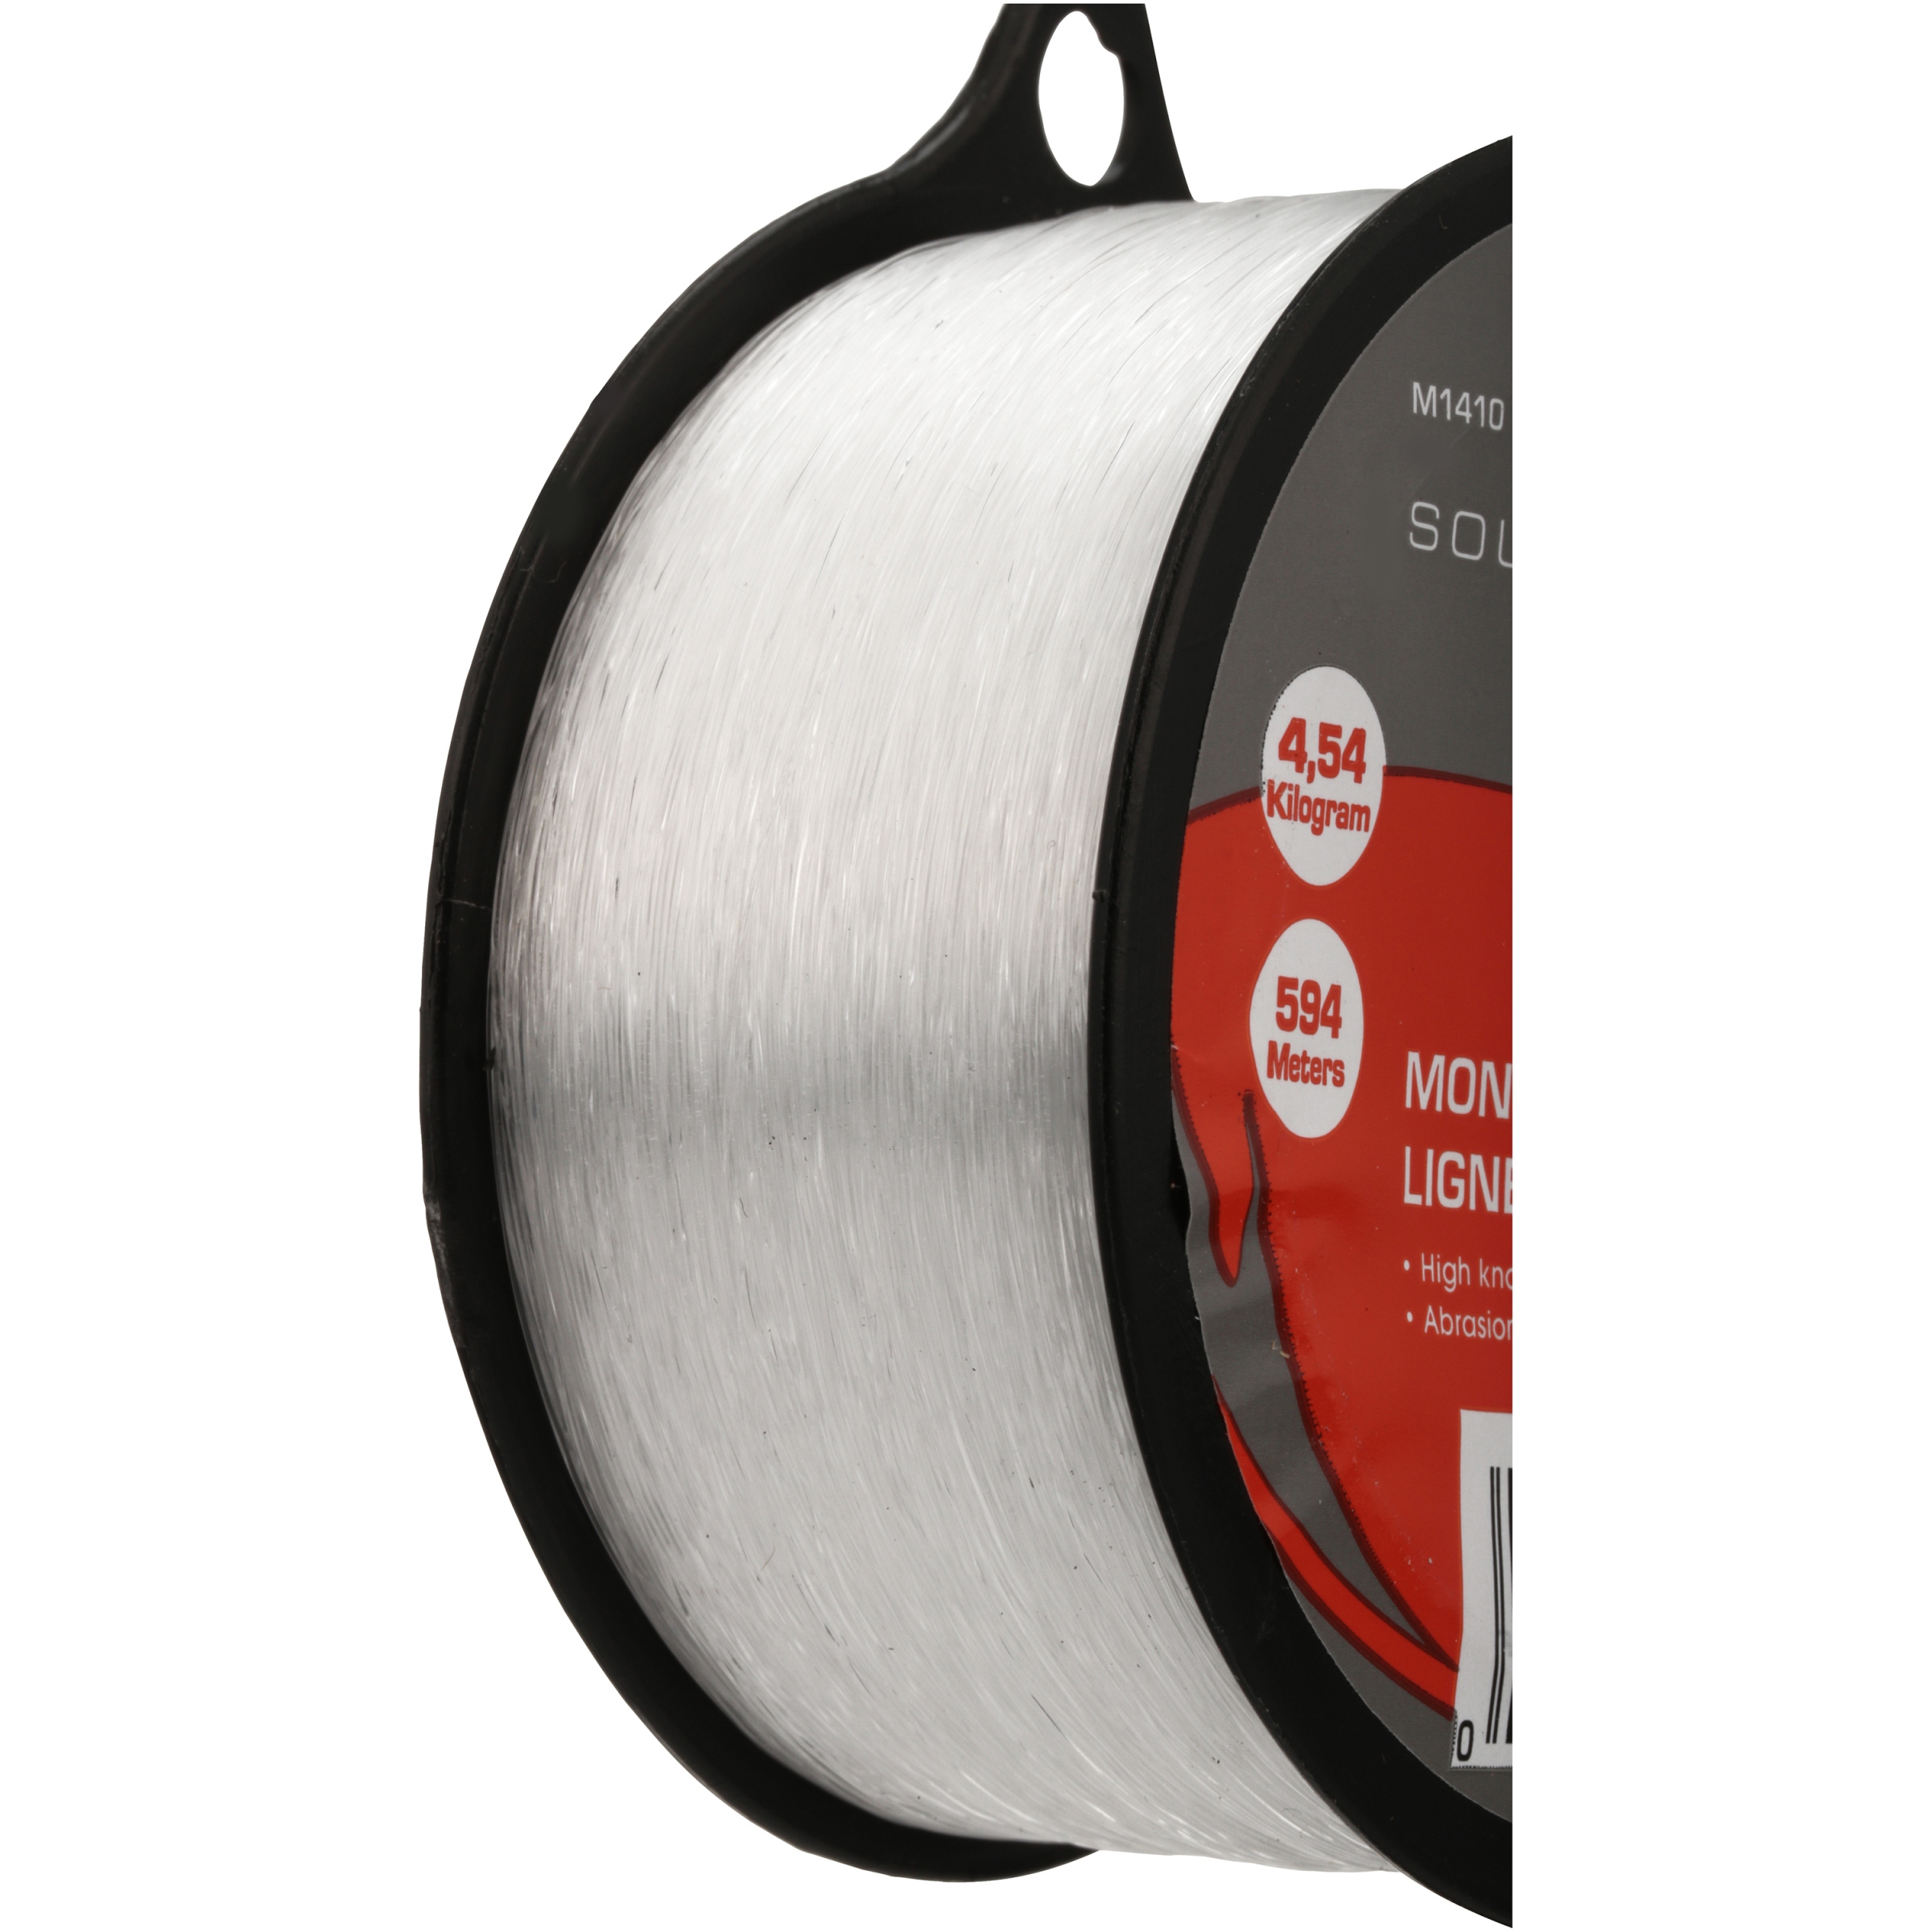 South Bend Monofilament 10-Pound Test Universal Fishing Line, 650 Yds. - image 4 of 5